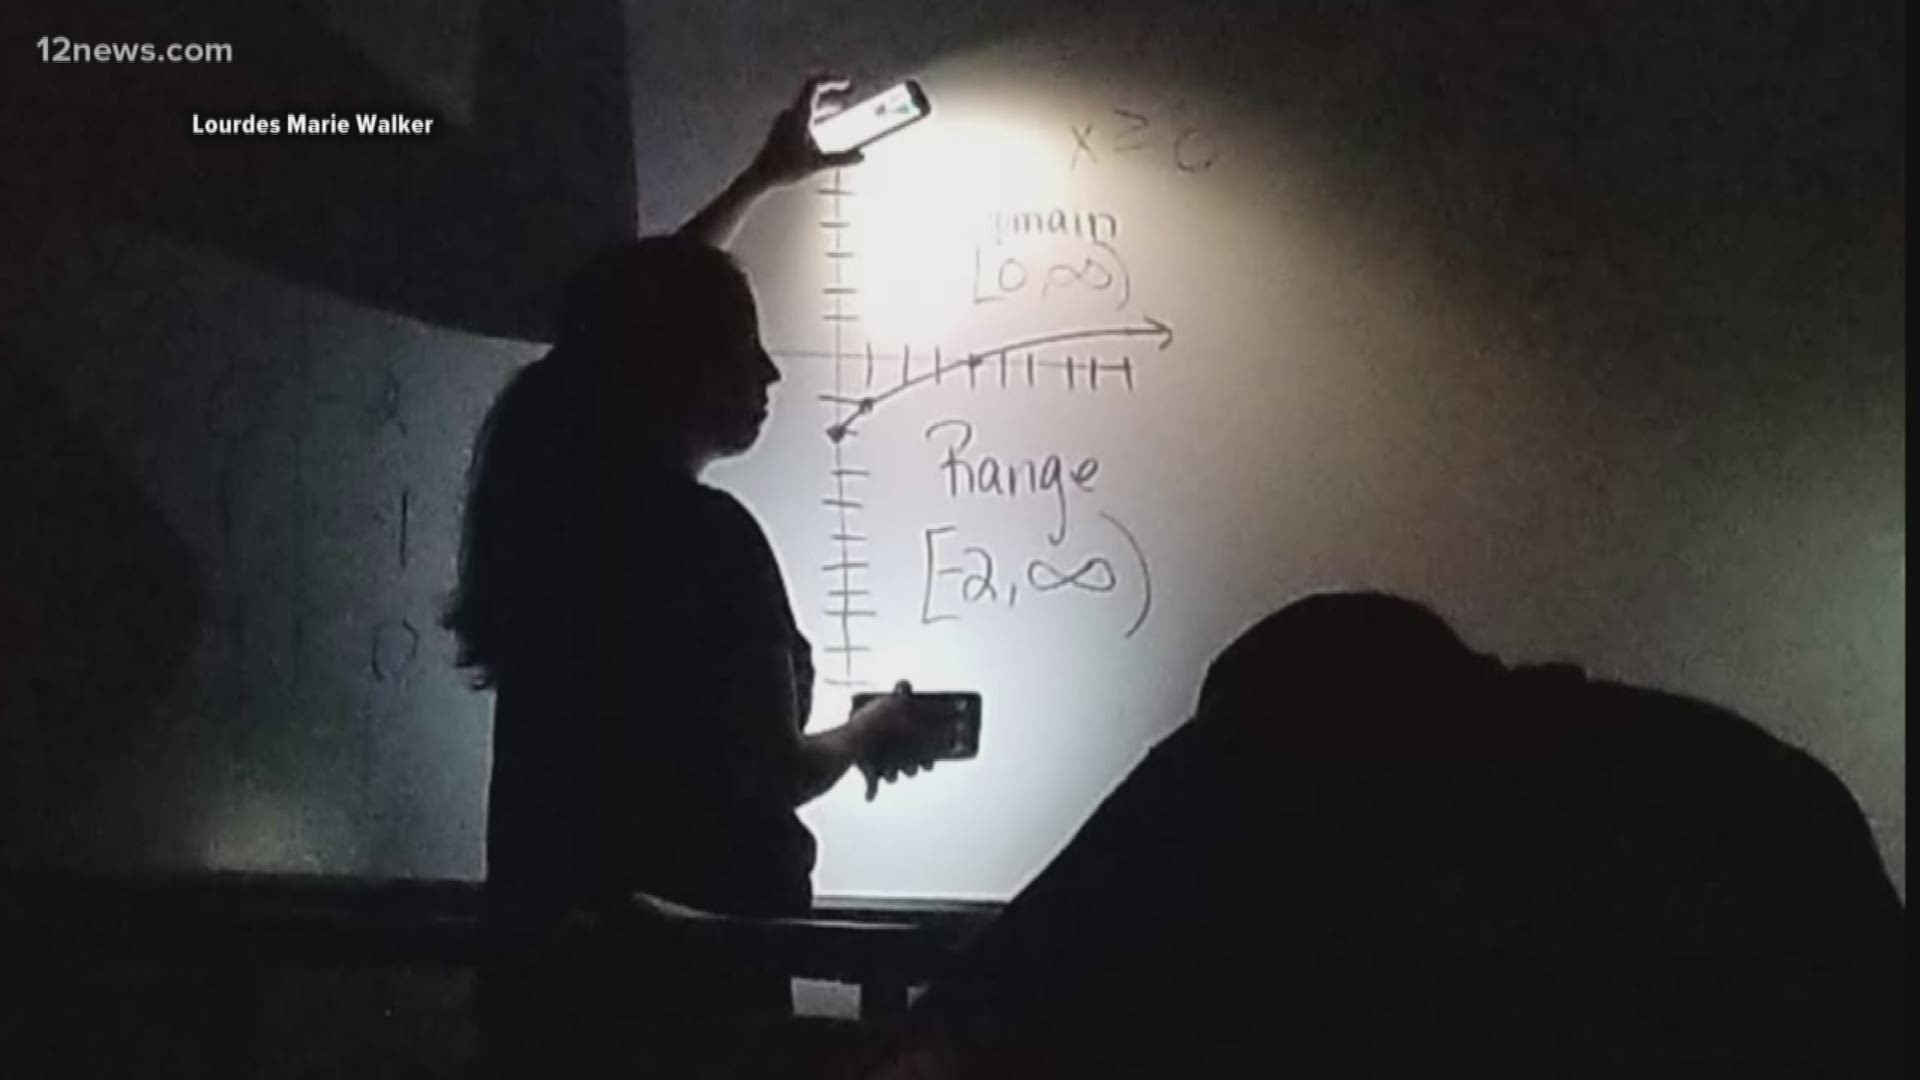 When the lights went out during Professor Roxanne Klassen's math class at Mesa Community College, her students were determined to keep learning.